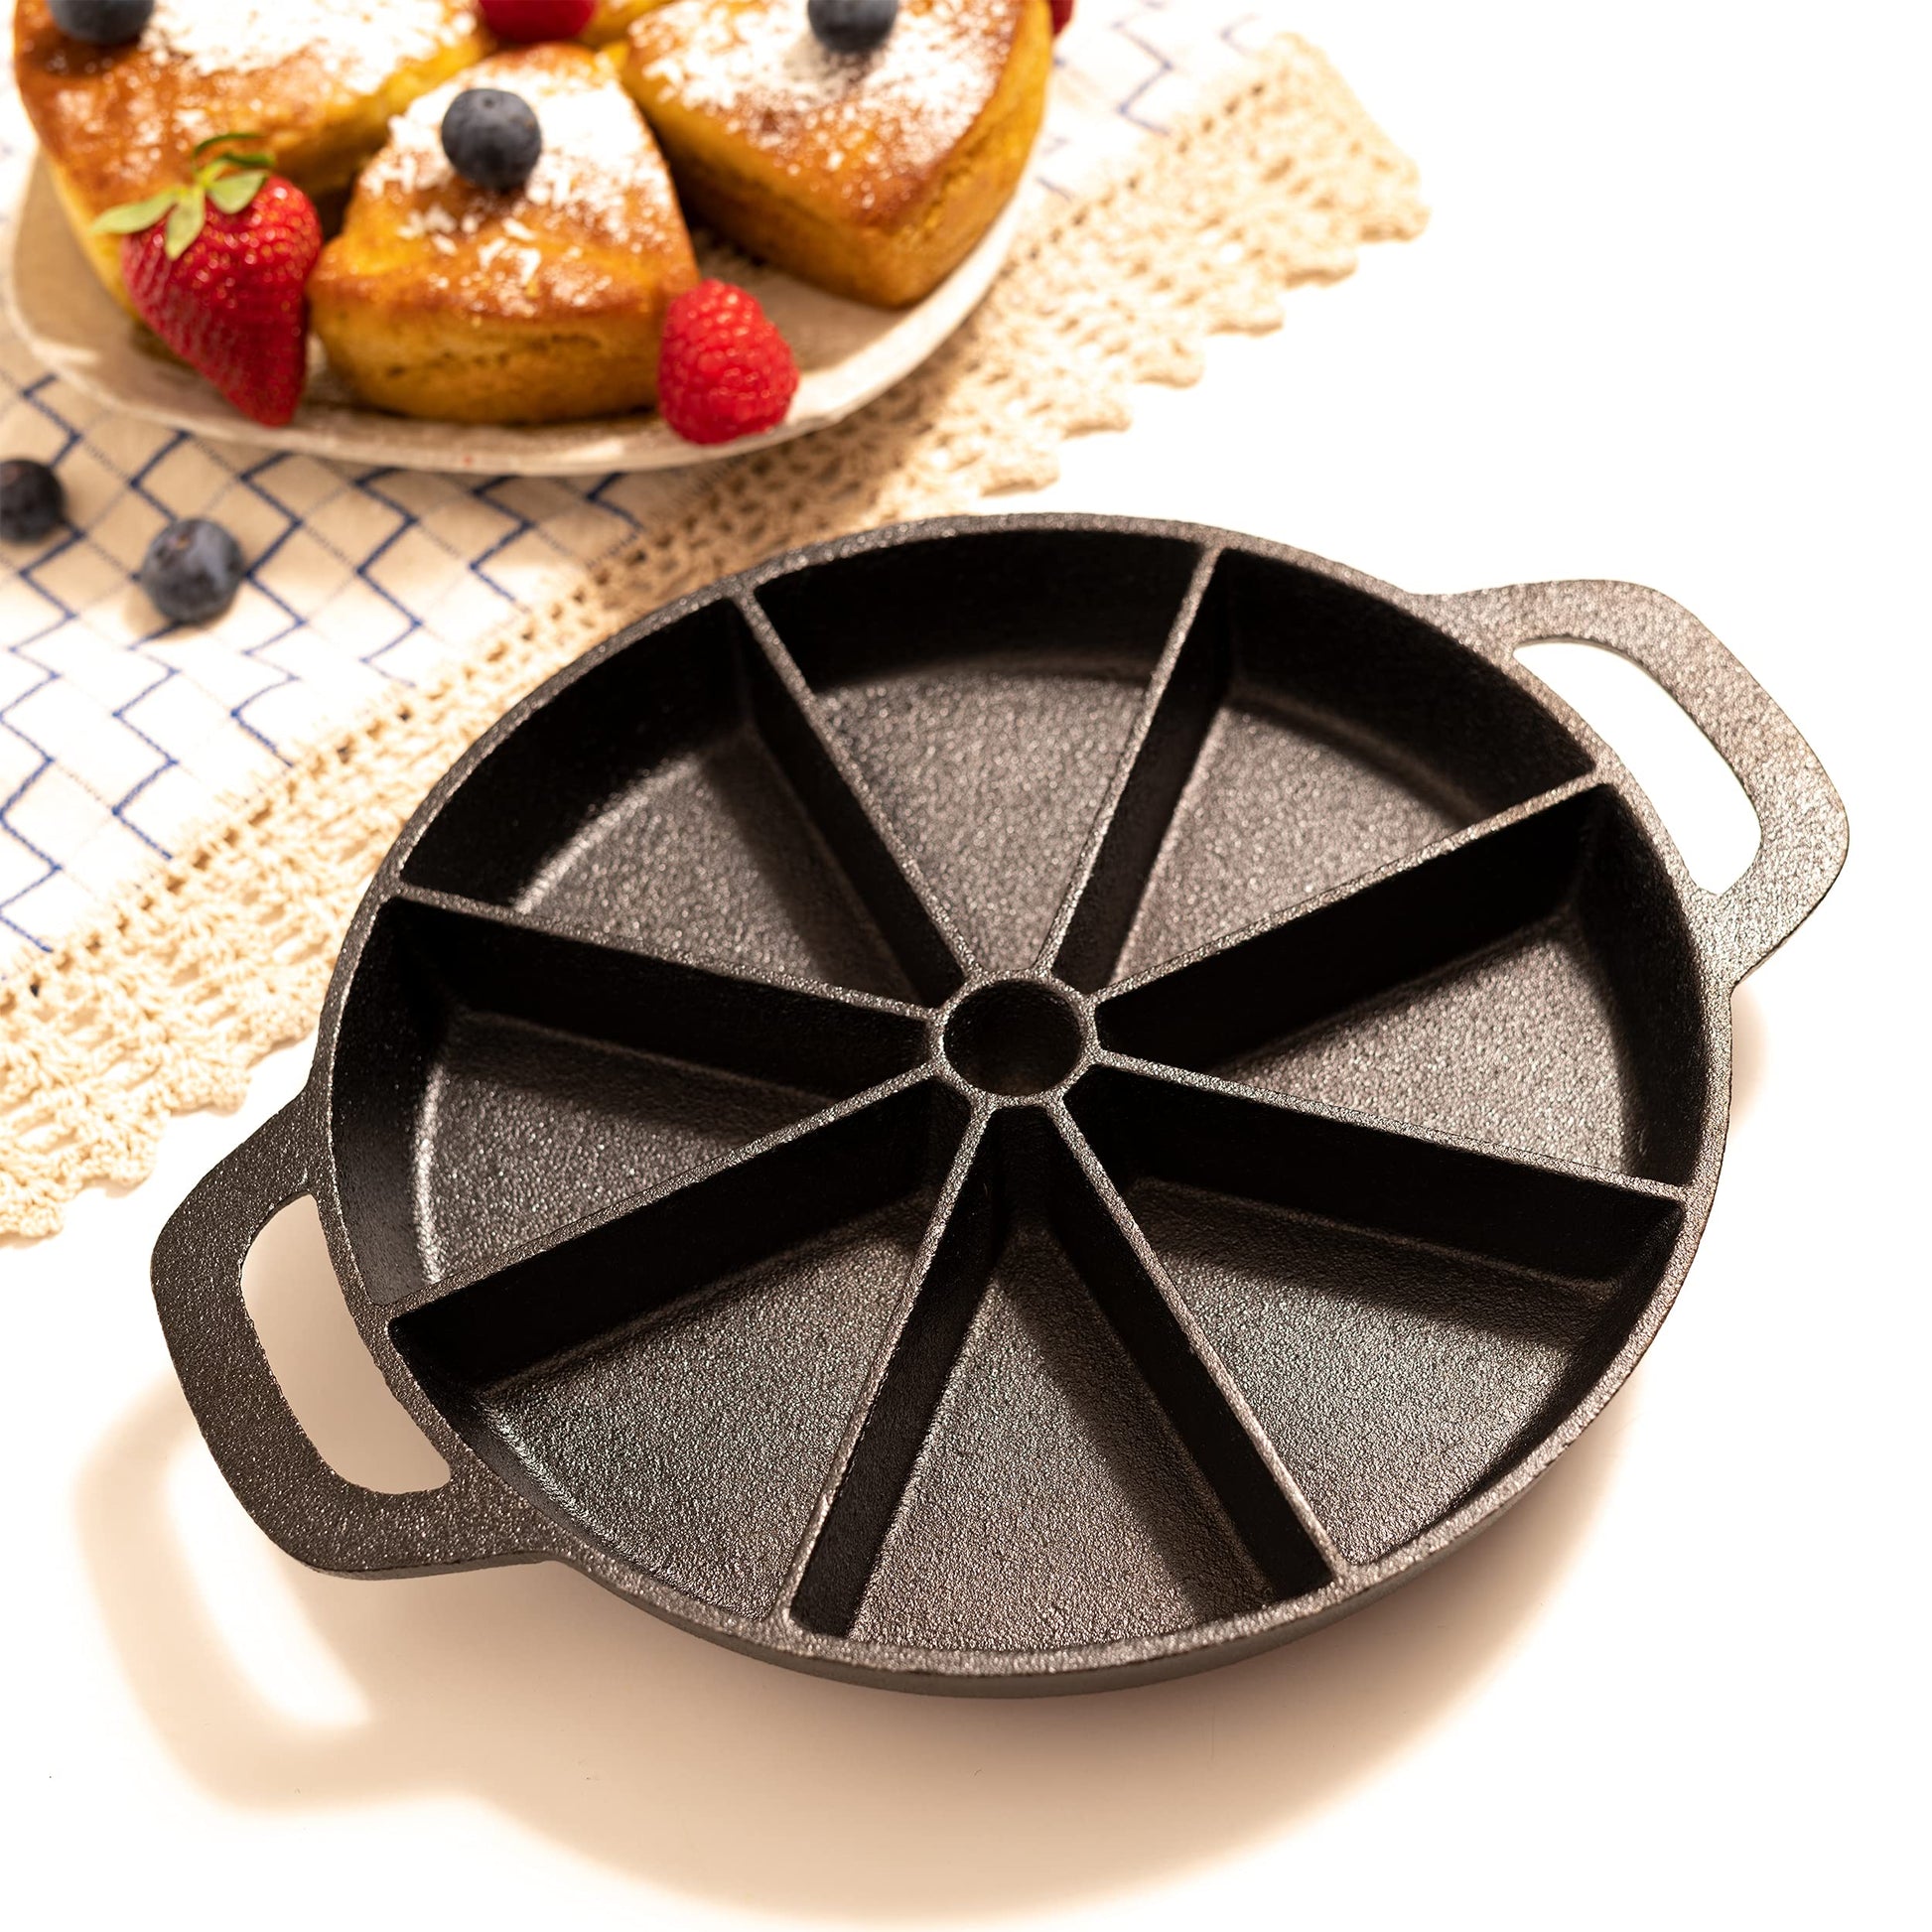  Lodge Cast Iron Wedge Pan: Home & Kitchen